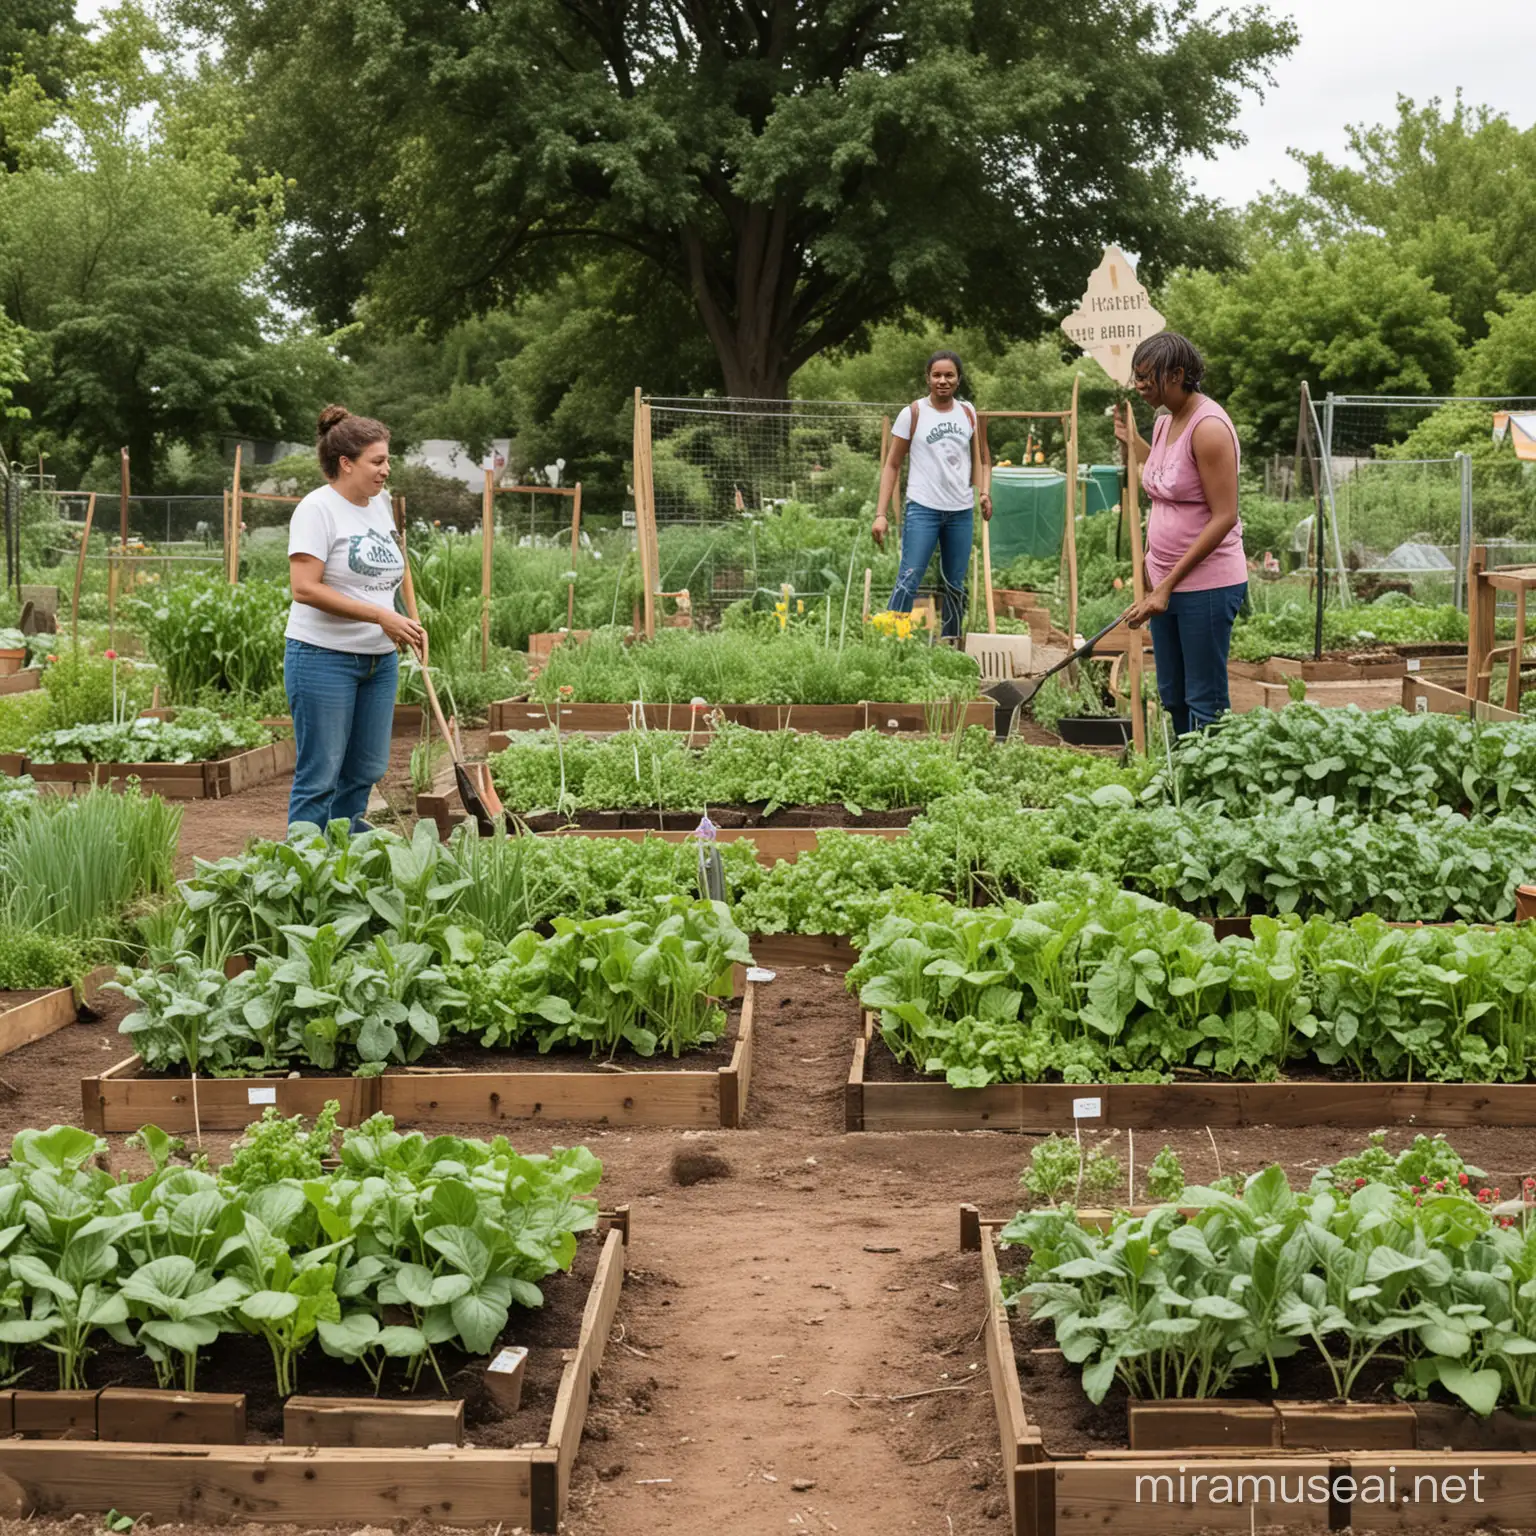 Visual representations of policy advocacy efforts or community support initiatives underscore the importance of advocacy in creating an enabling environment for community gardens.